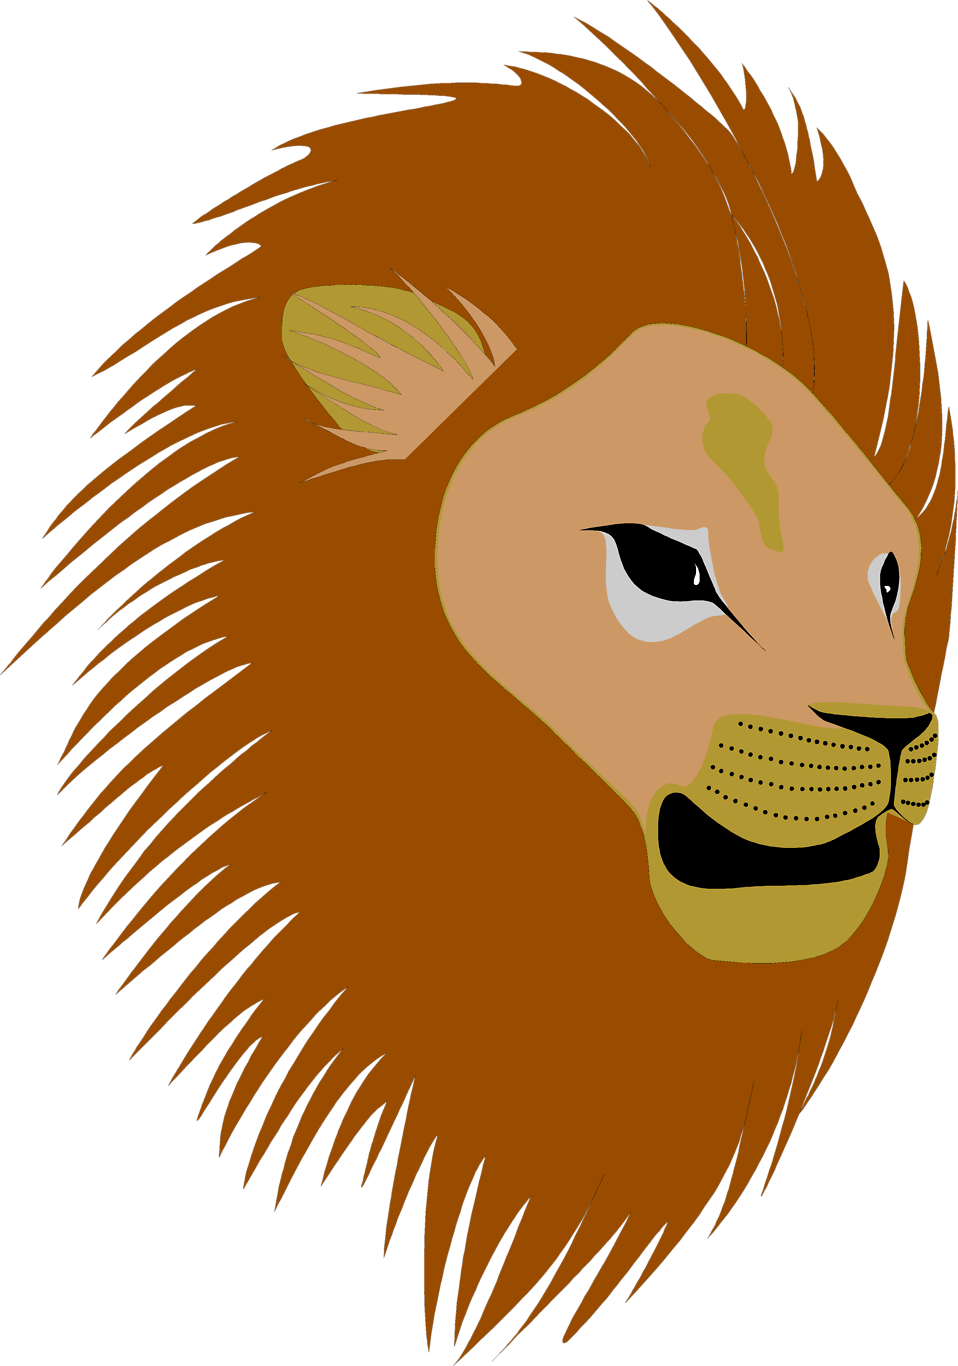 Lion | Free Stock Photo | Illustration of a lions head | # 2974